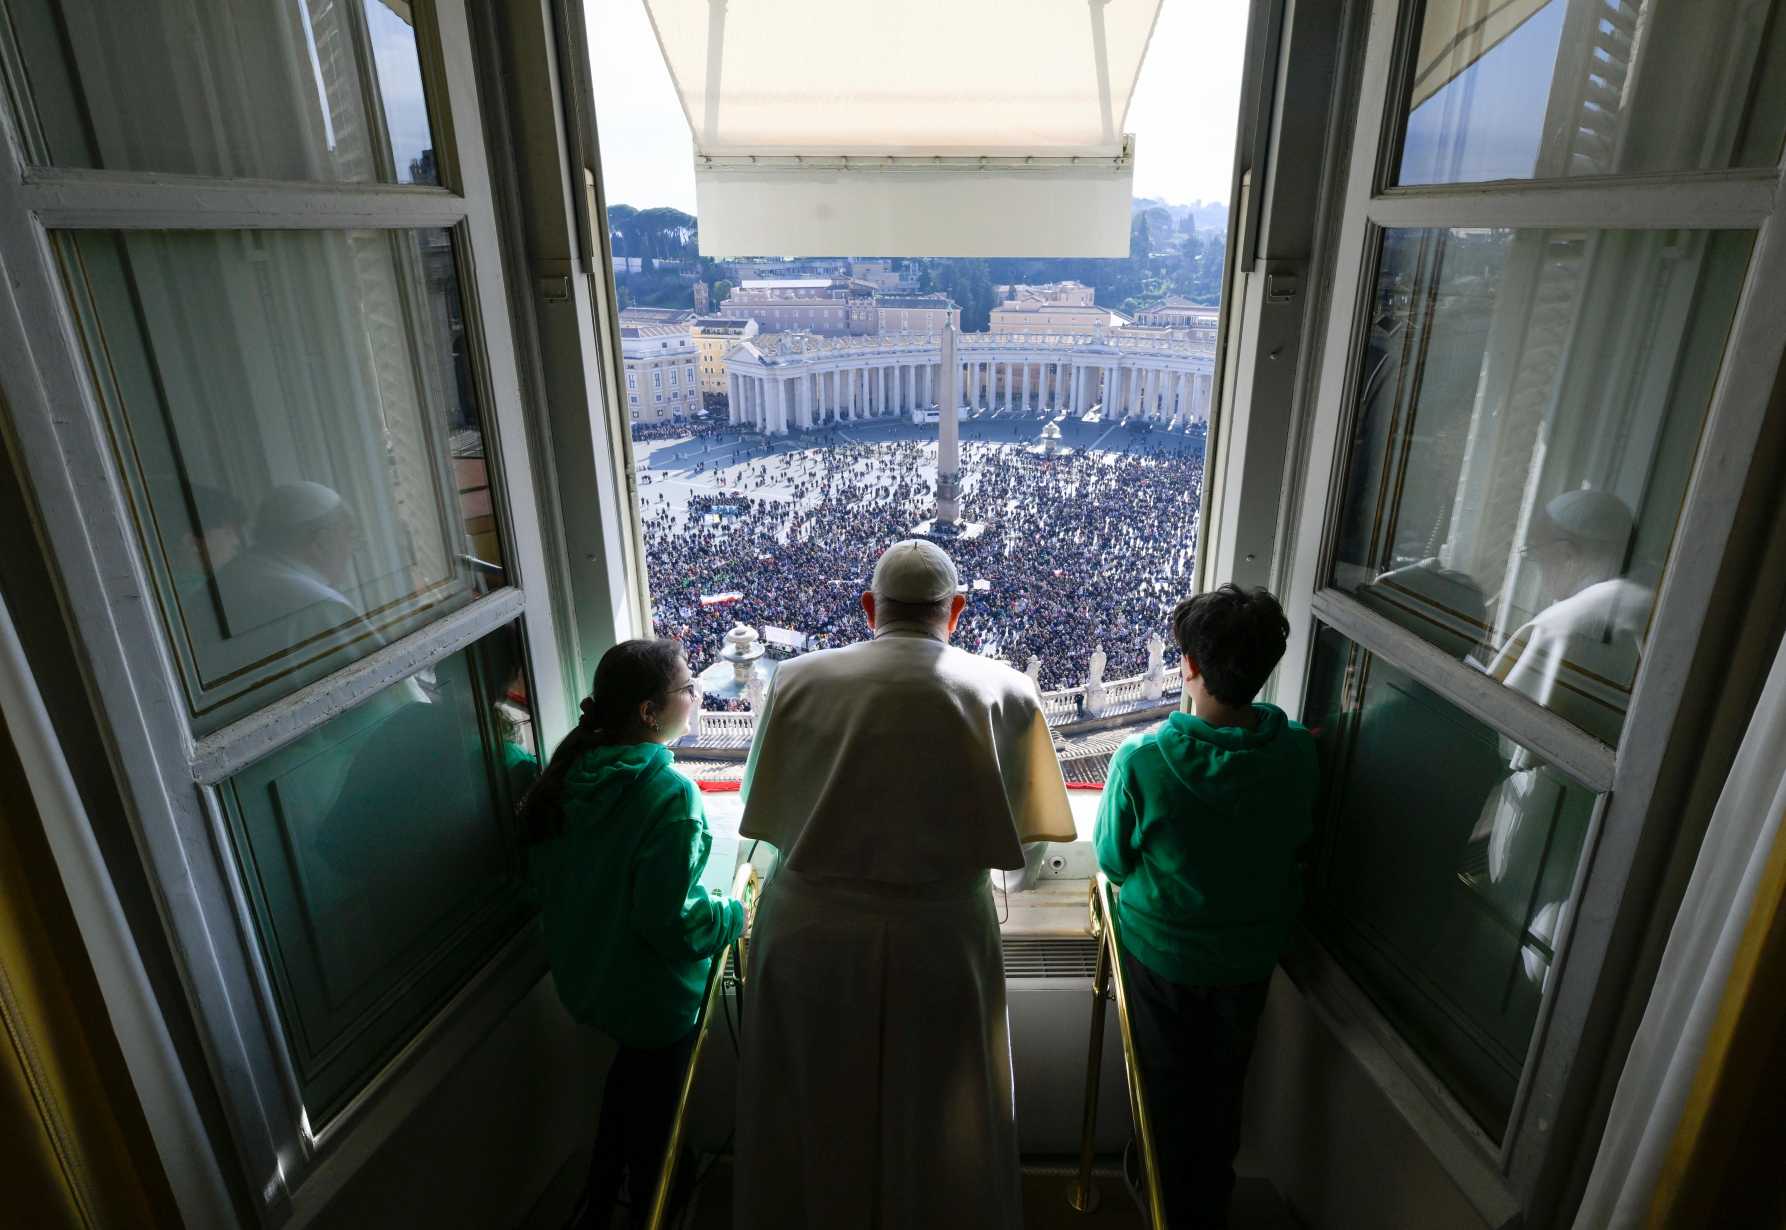 Pope calls for global cease-fire; says humanity is on brink of abyss